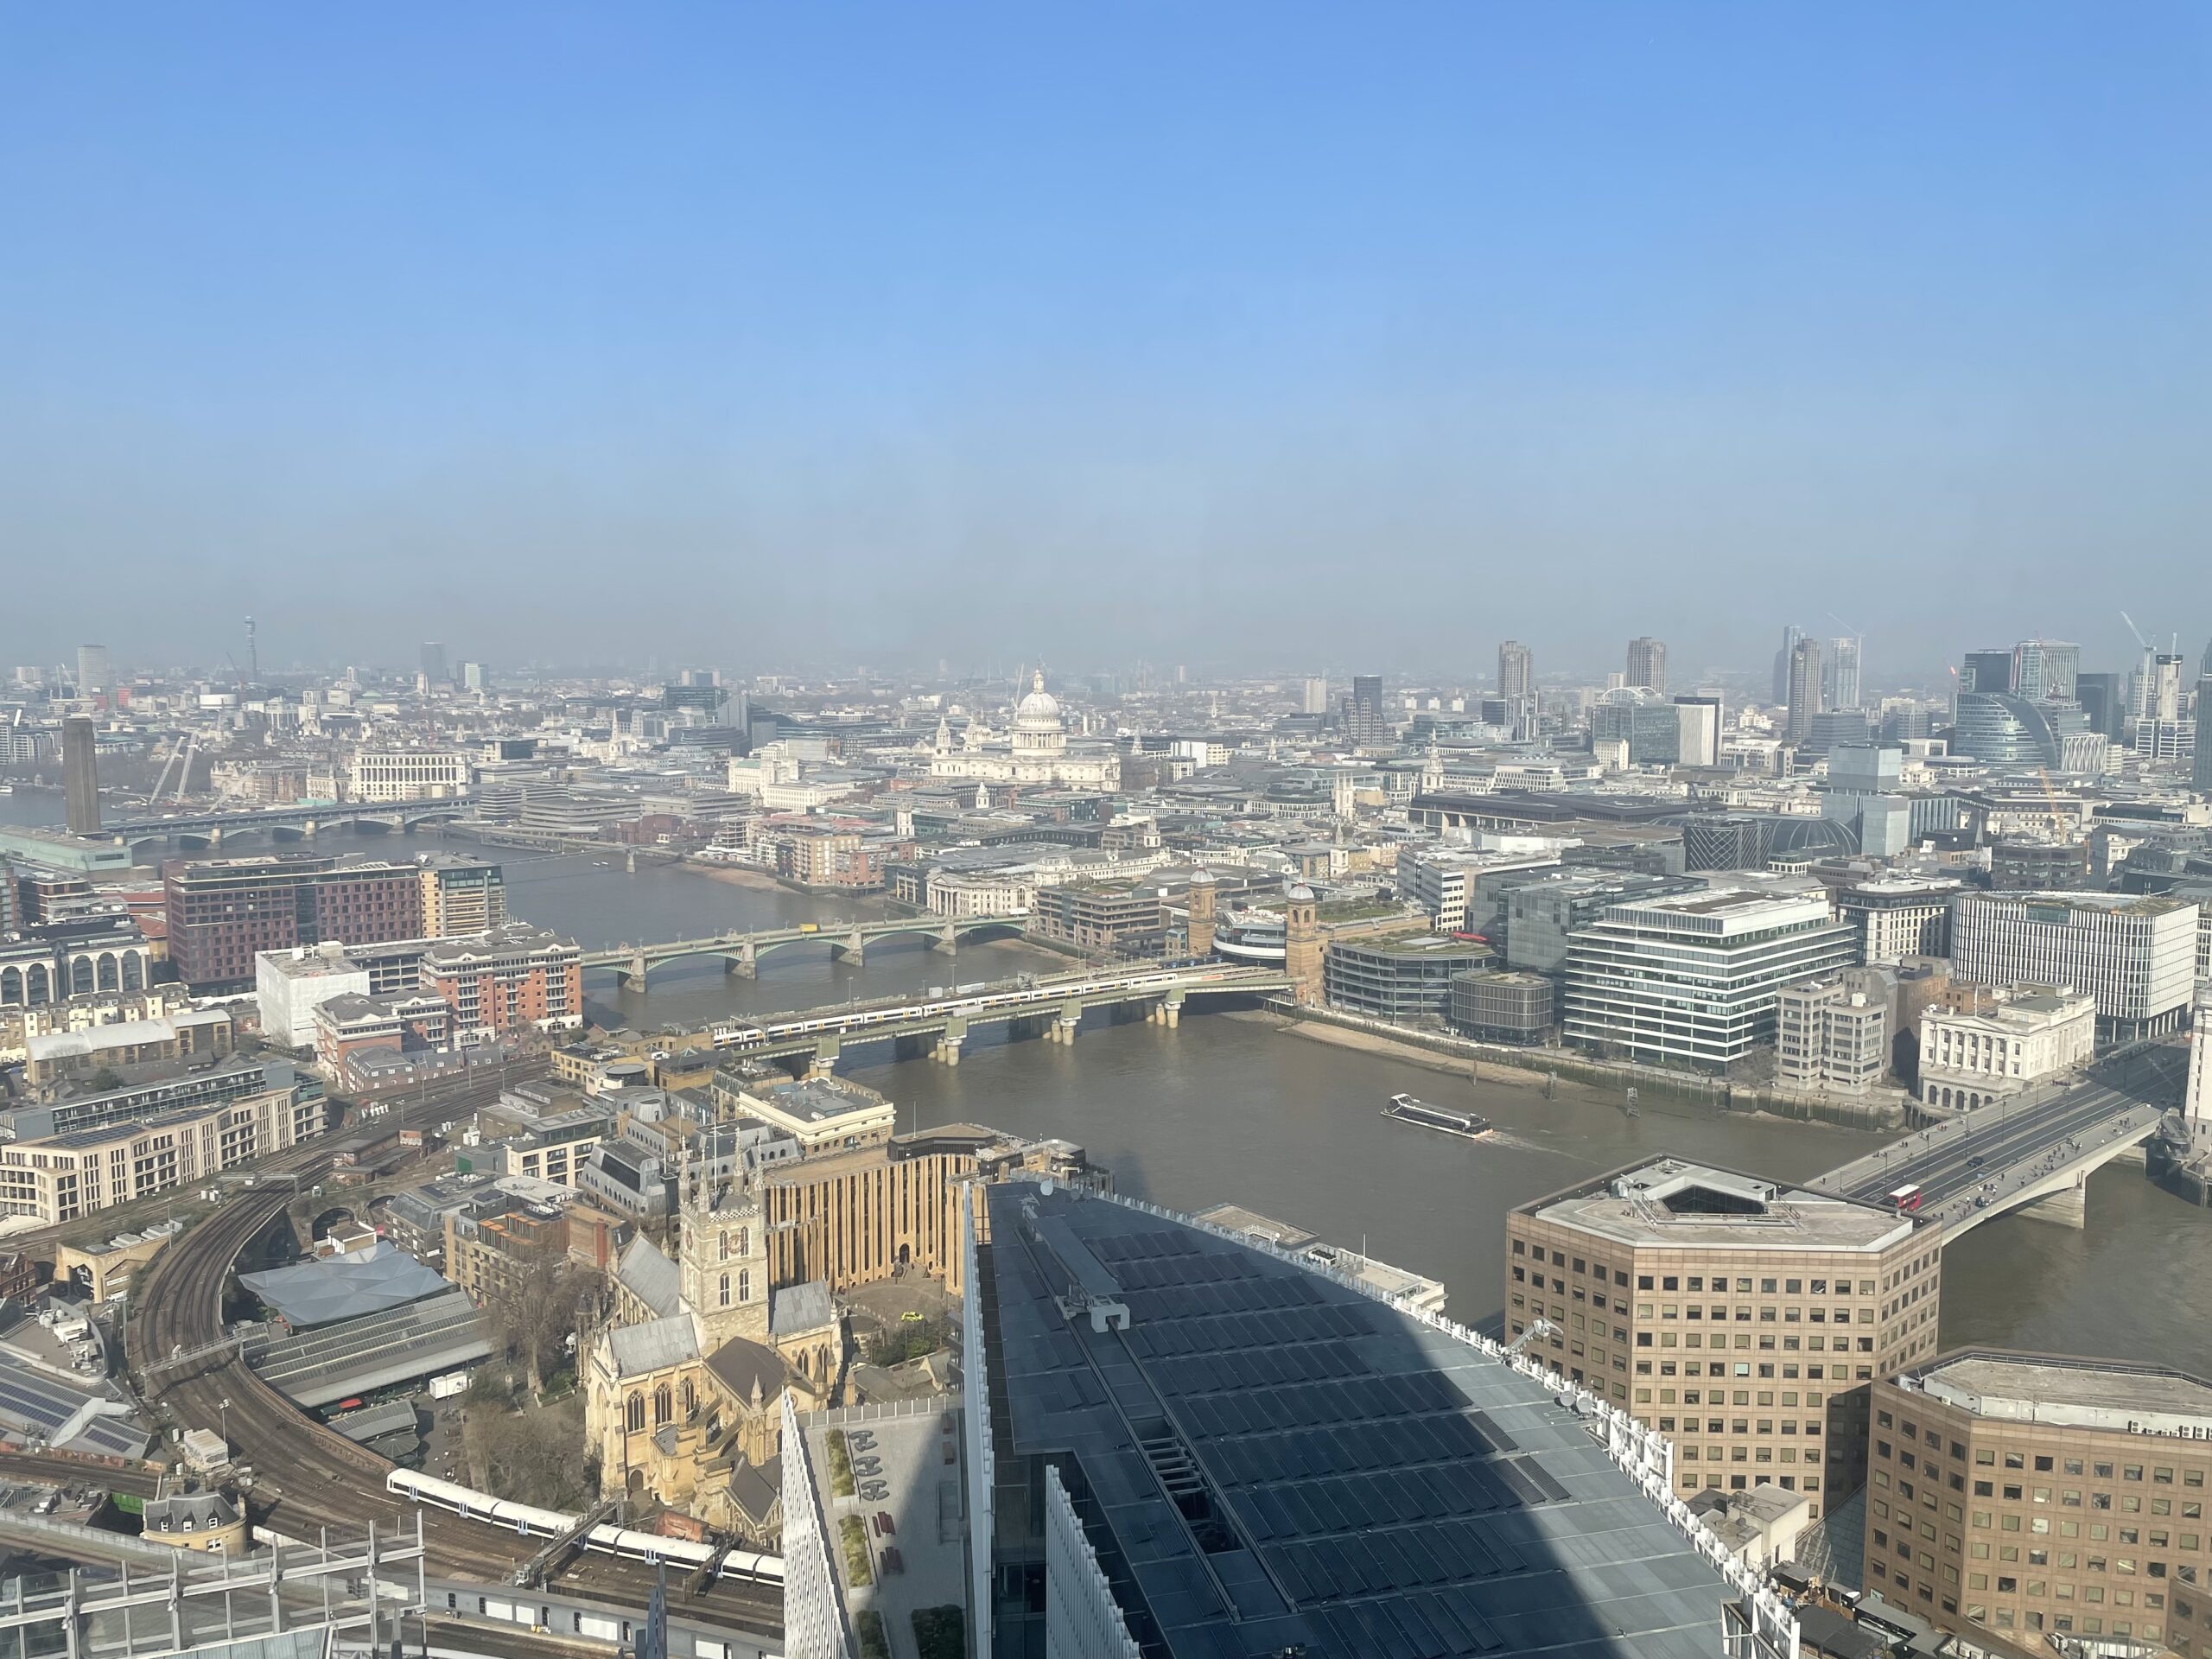 Breakfast Event at The Shard